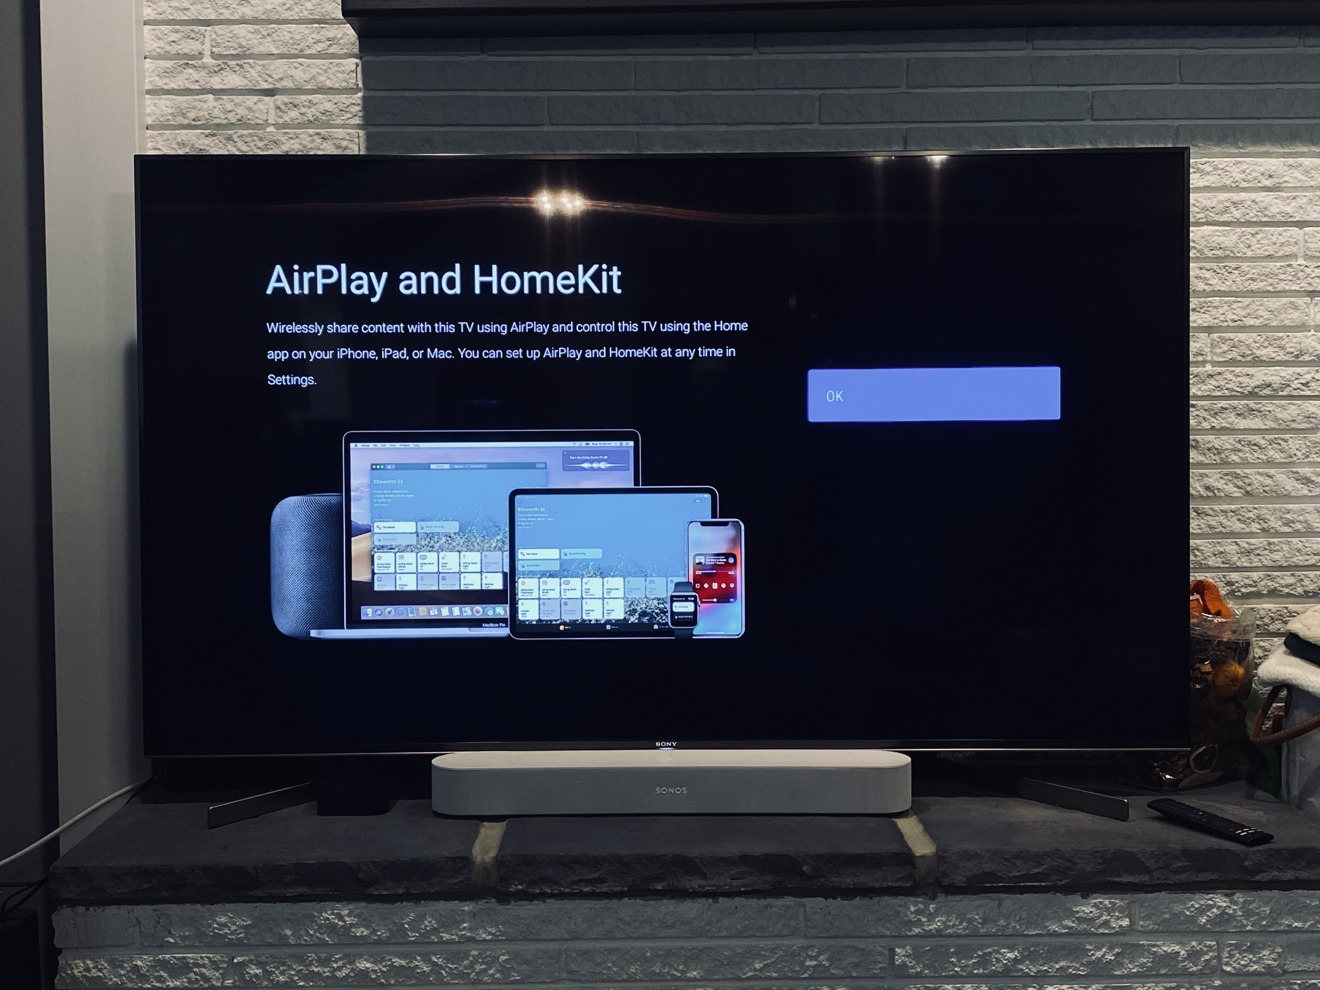 Hot And Airplay 2 On Sony Smart Tvs, Can I Screen Mirror Iphone To Sony Bravia